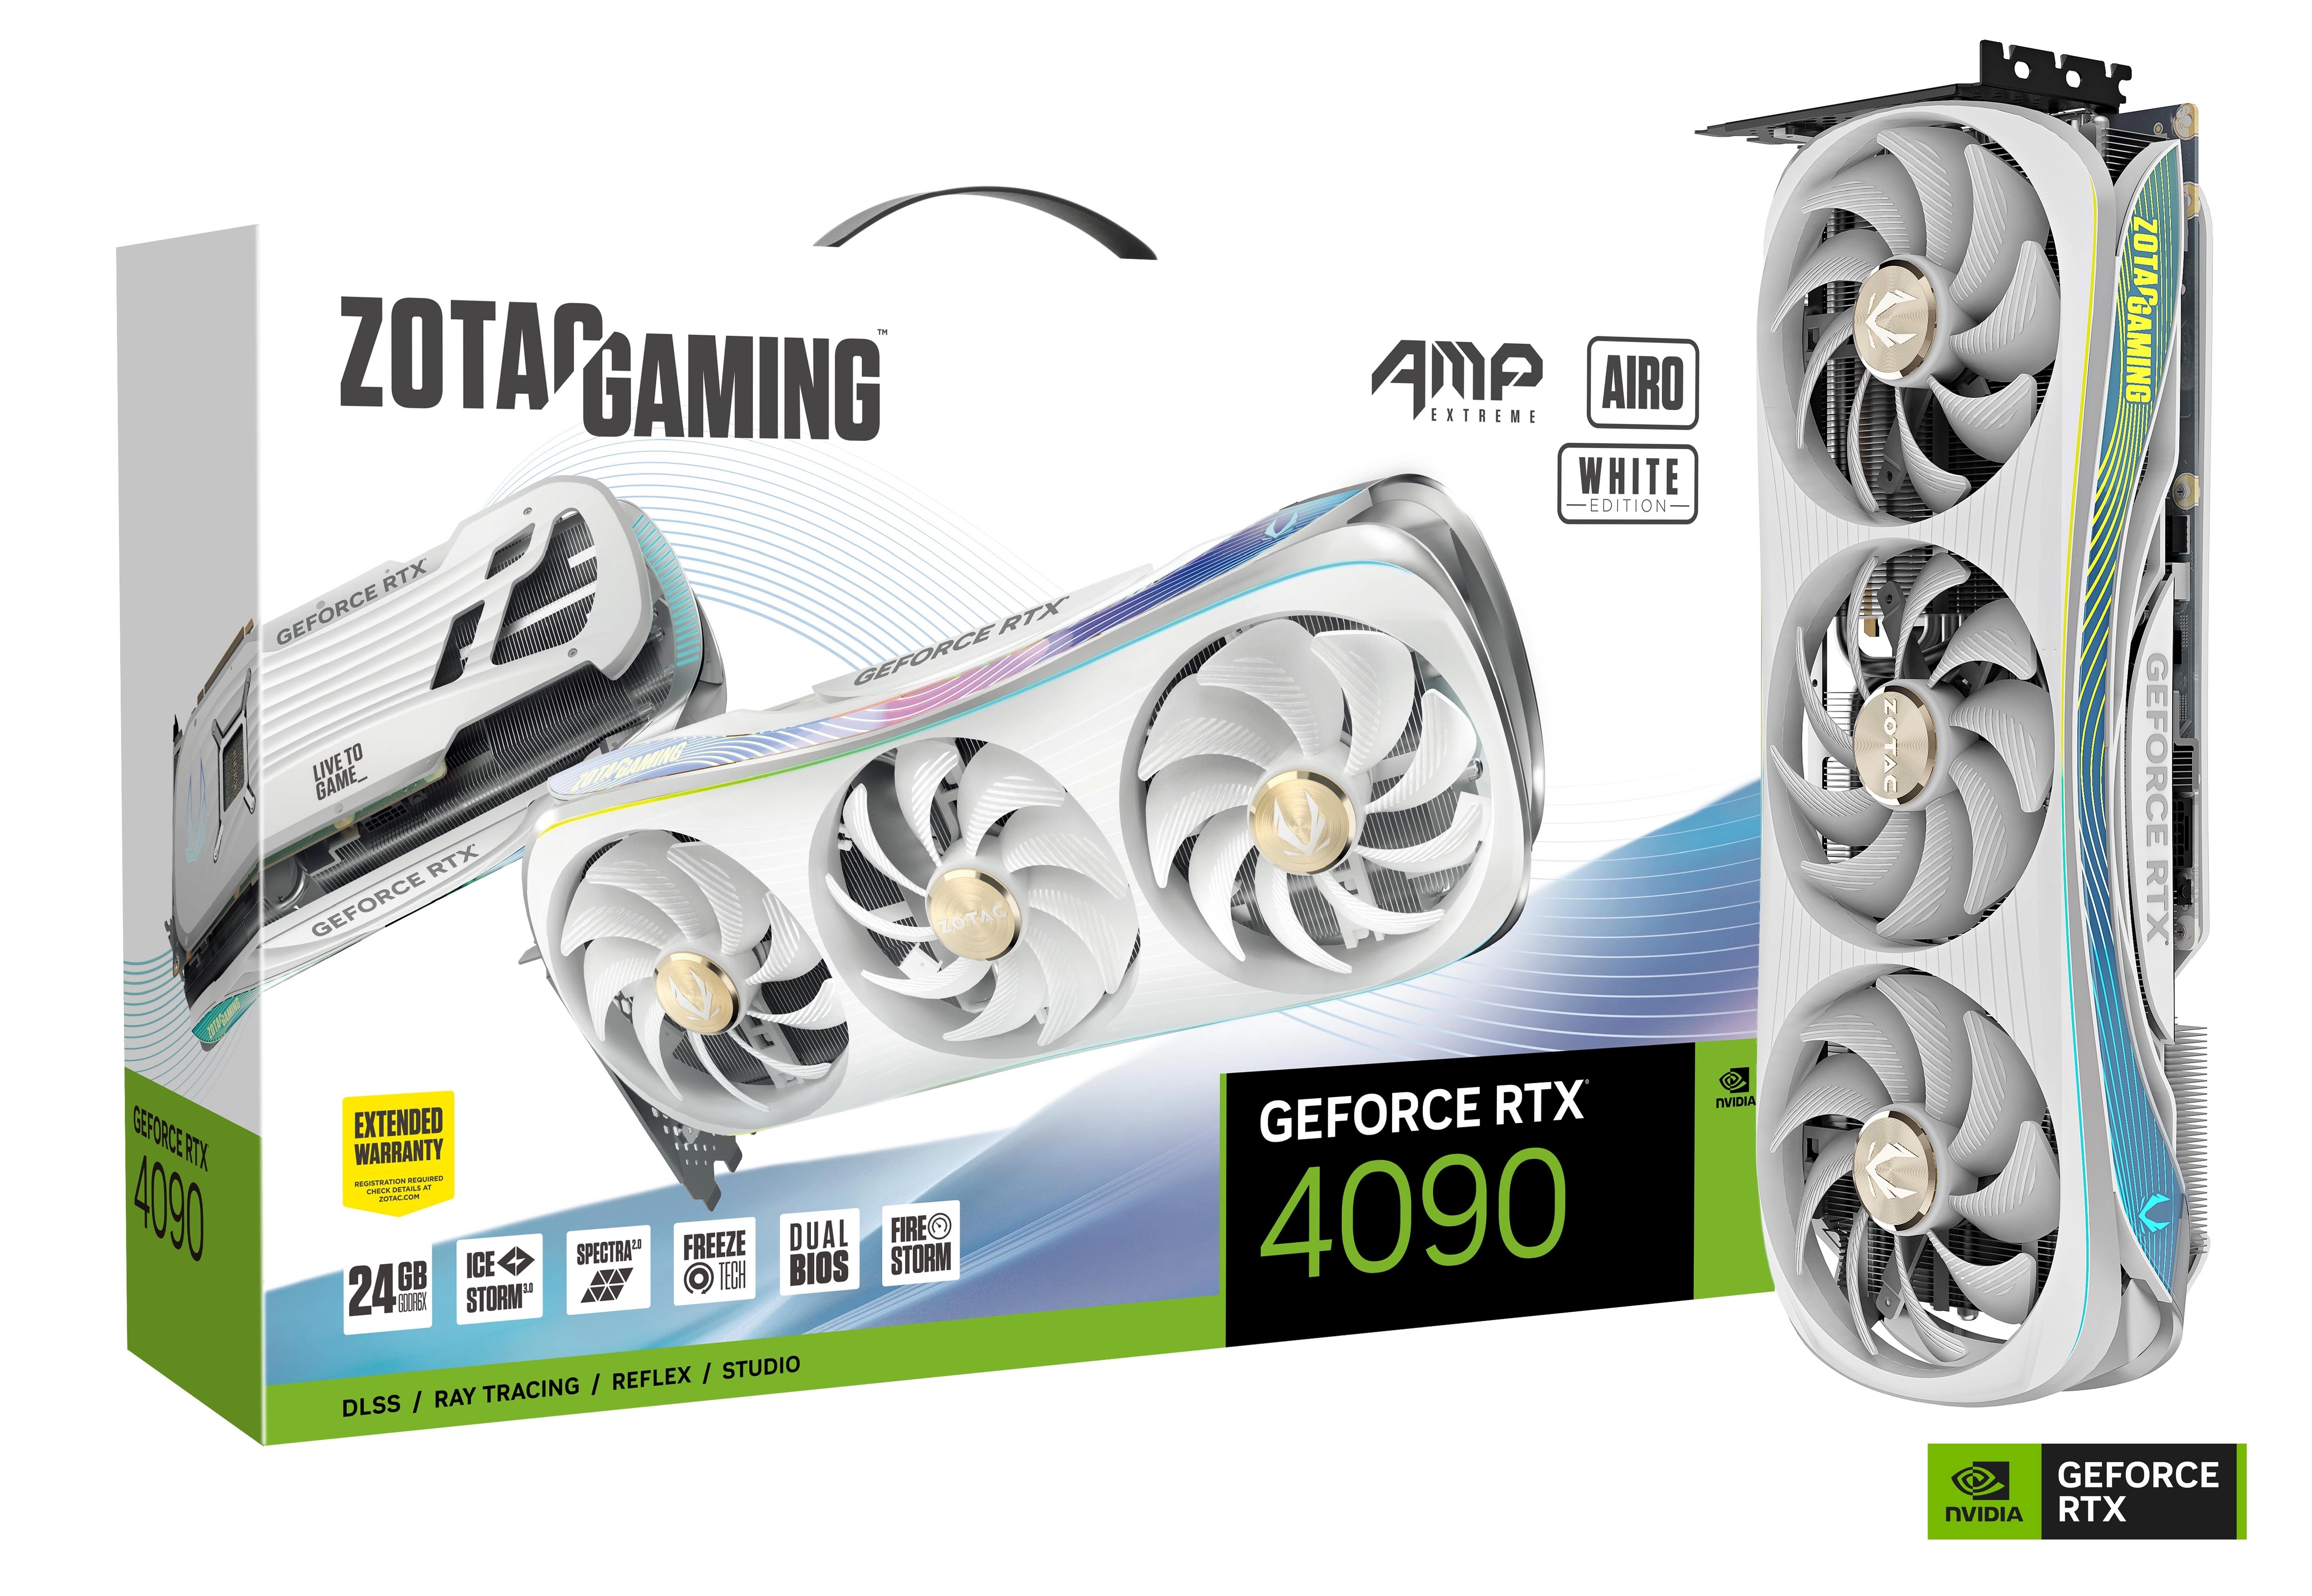 ZOTAC GAMING GeForce RTX 4090 AMP Extreme AIRO White Edition Package